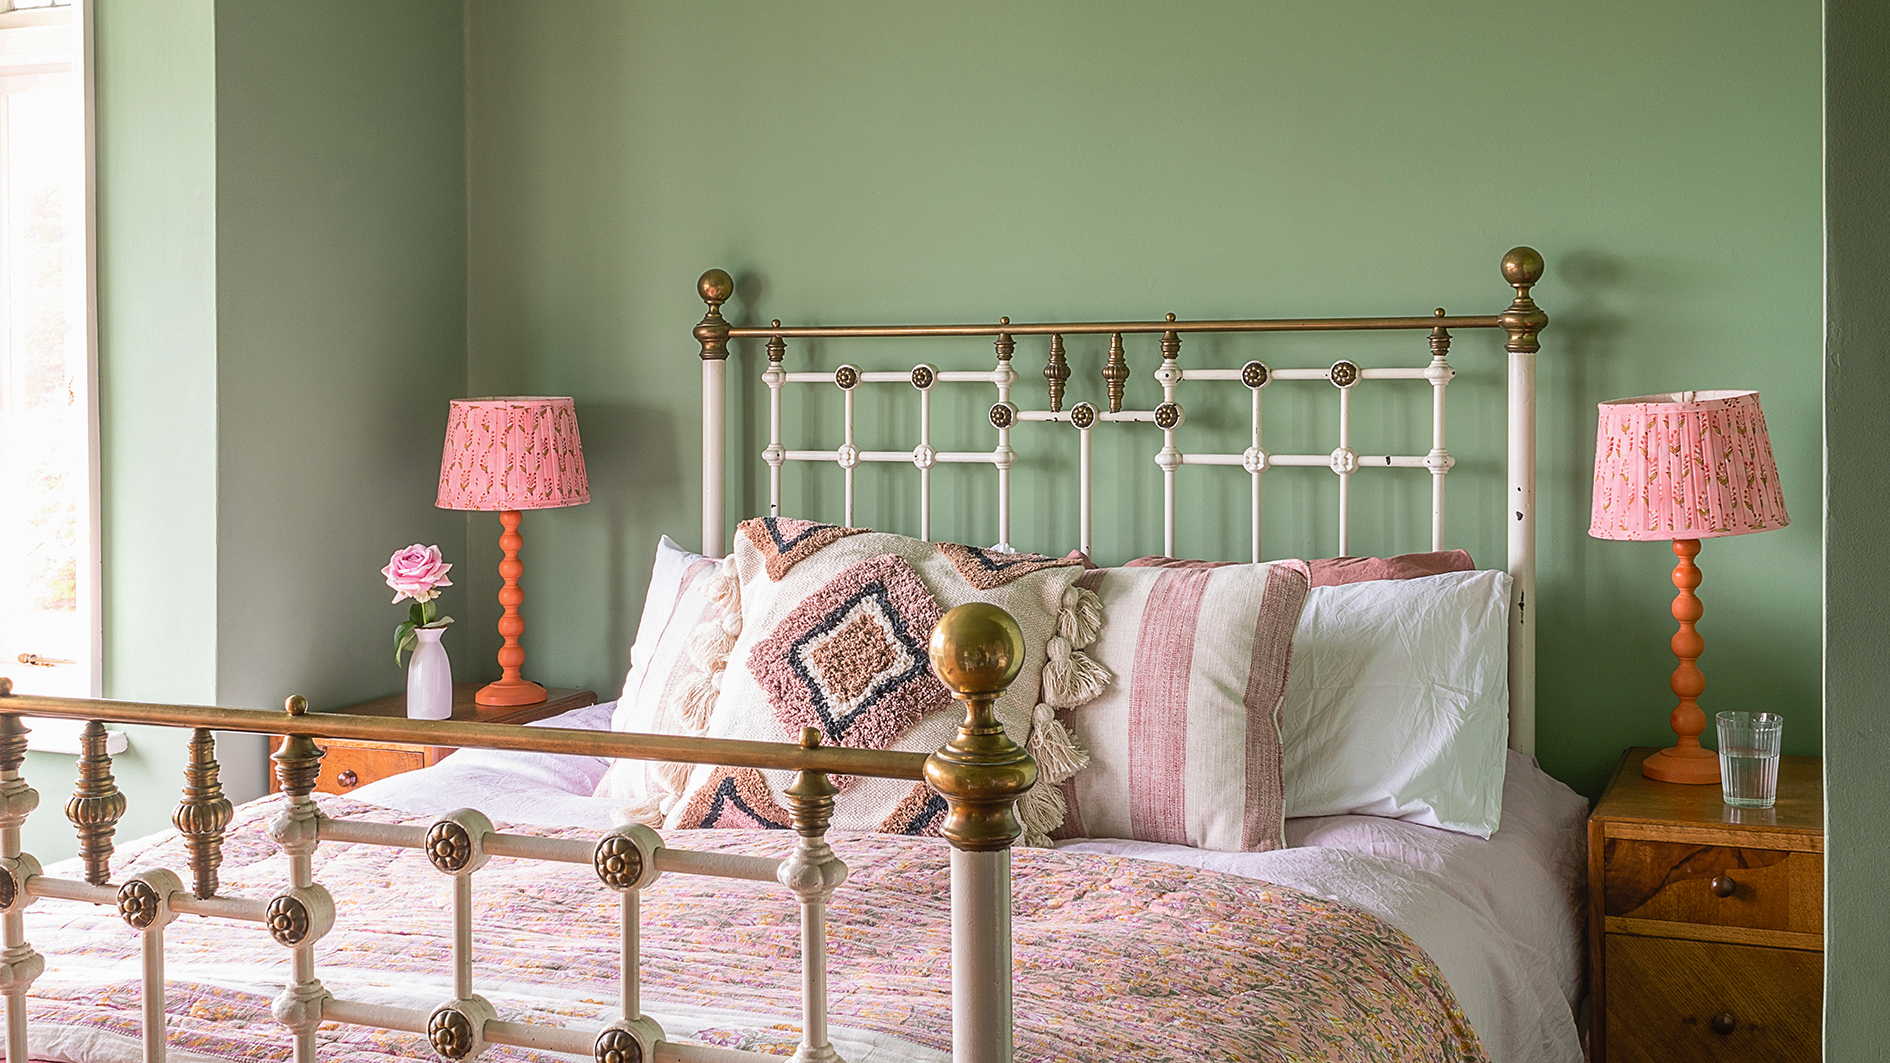 The best paint colors for a calm and serene bedroom